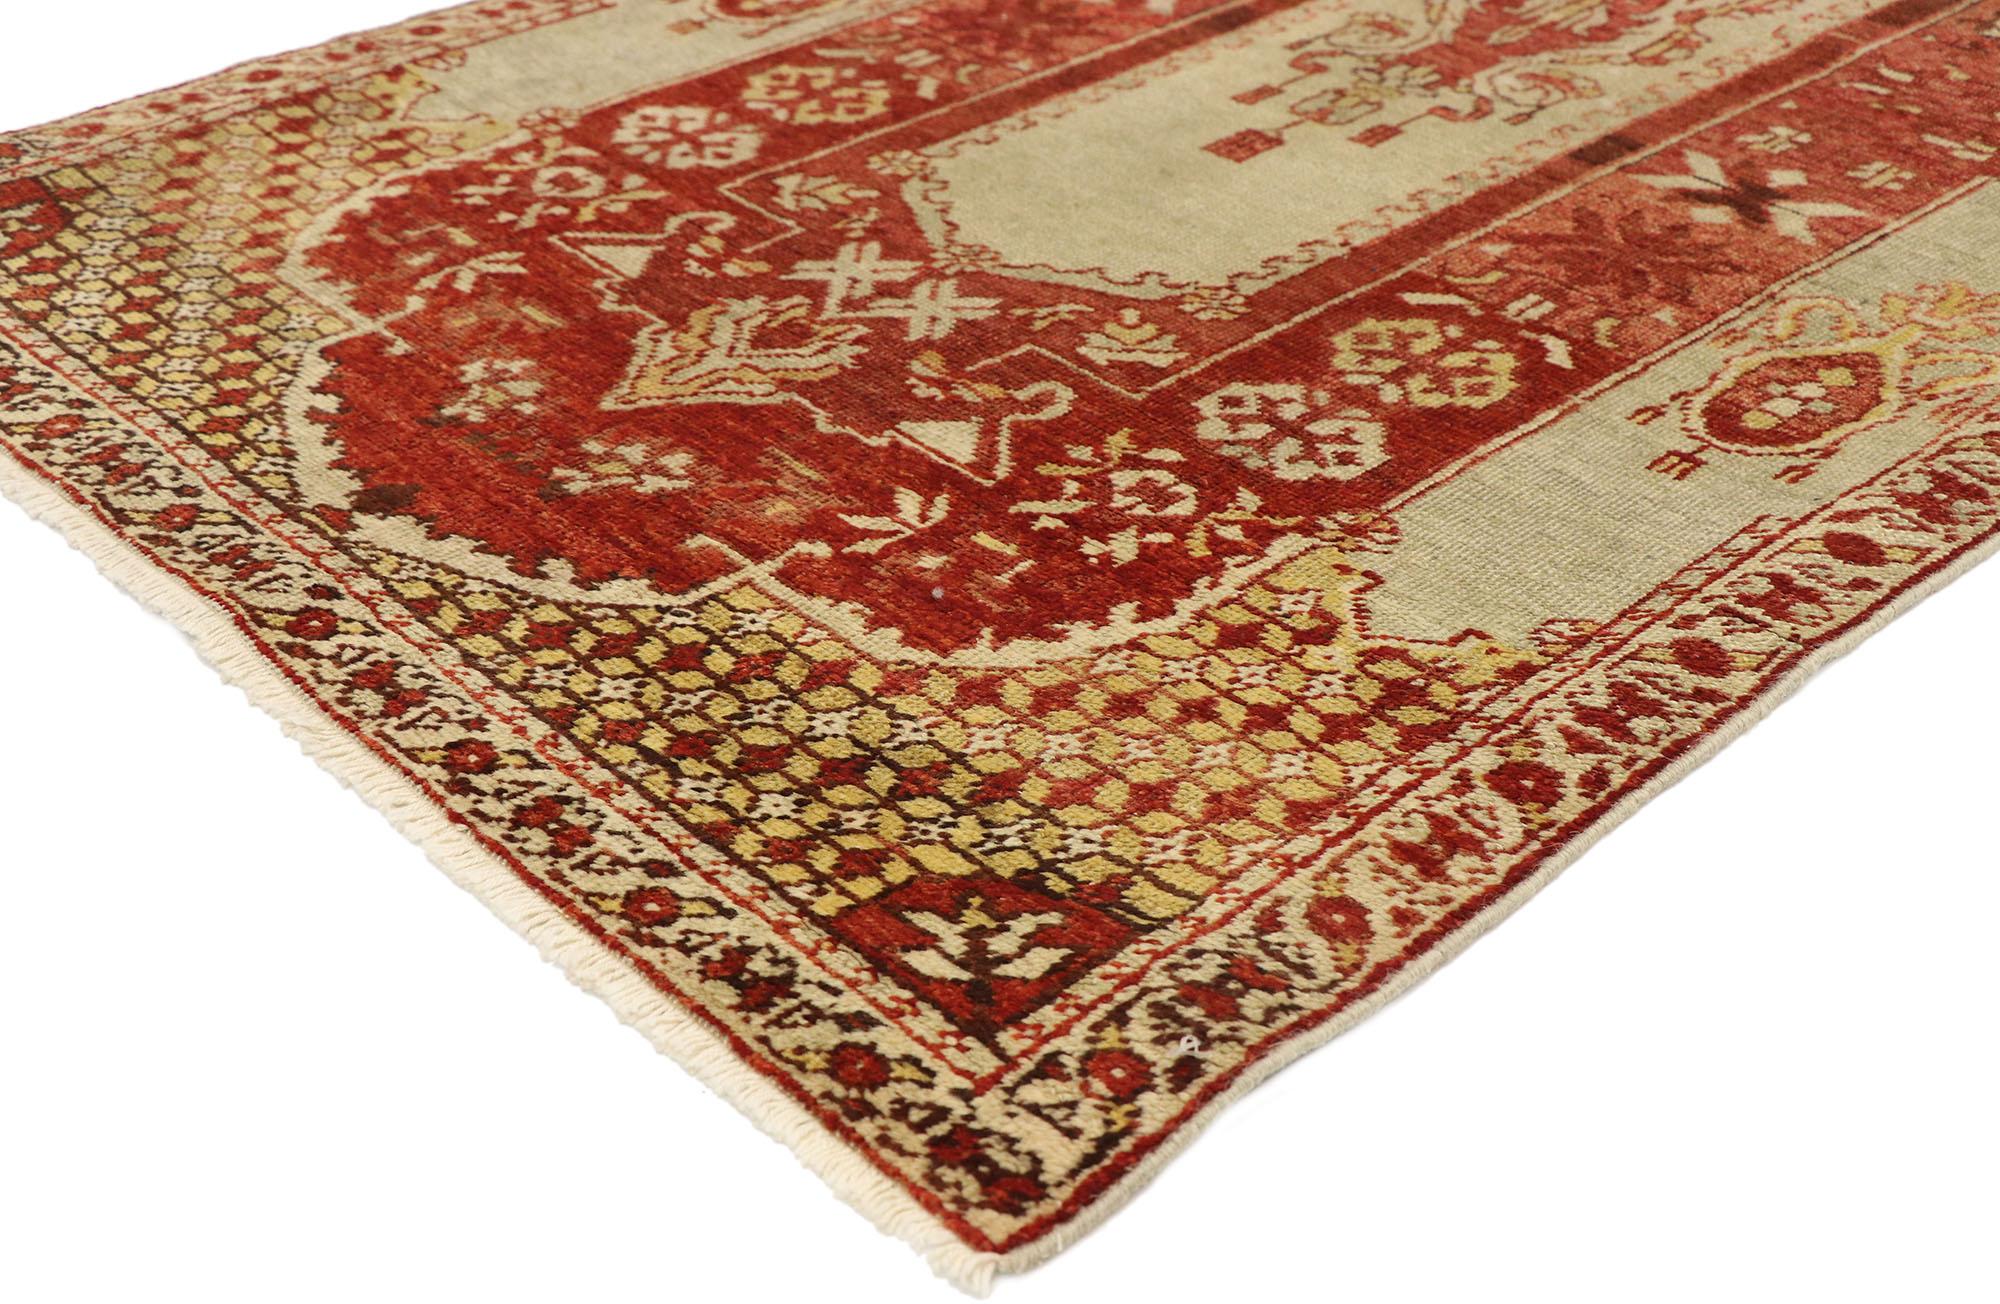 74047 Antique Turkish Oushak rug with Traditional style. Sophisticated and refined with a French Victorian style, this hand knotted wool antique Turkish Oushak rug charms with ease. The abrashed cut-out features a botanical medallion surrounded with